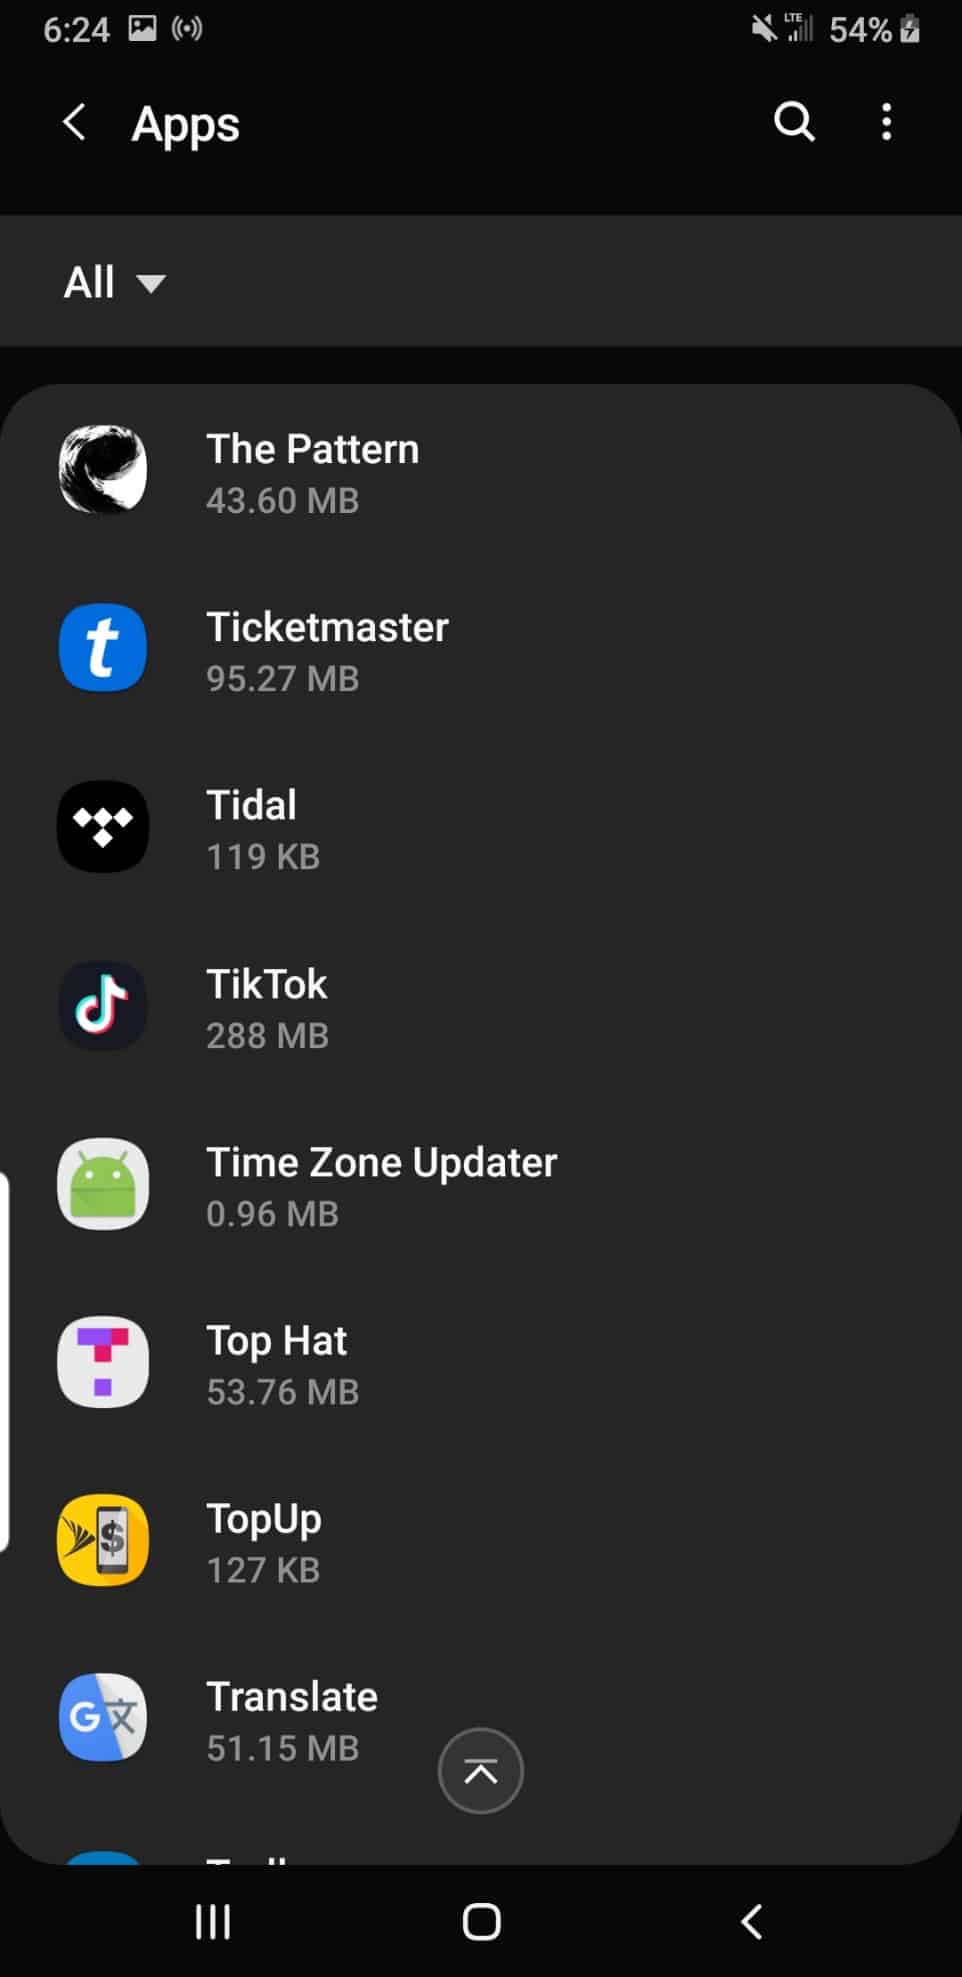 Tiktok Comments Not Showing? Try These 14 Fixes - Techzillo